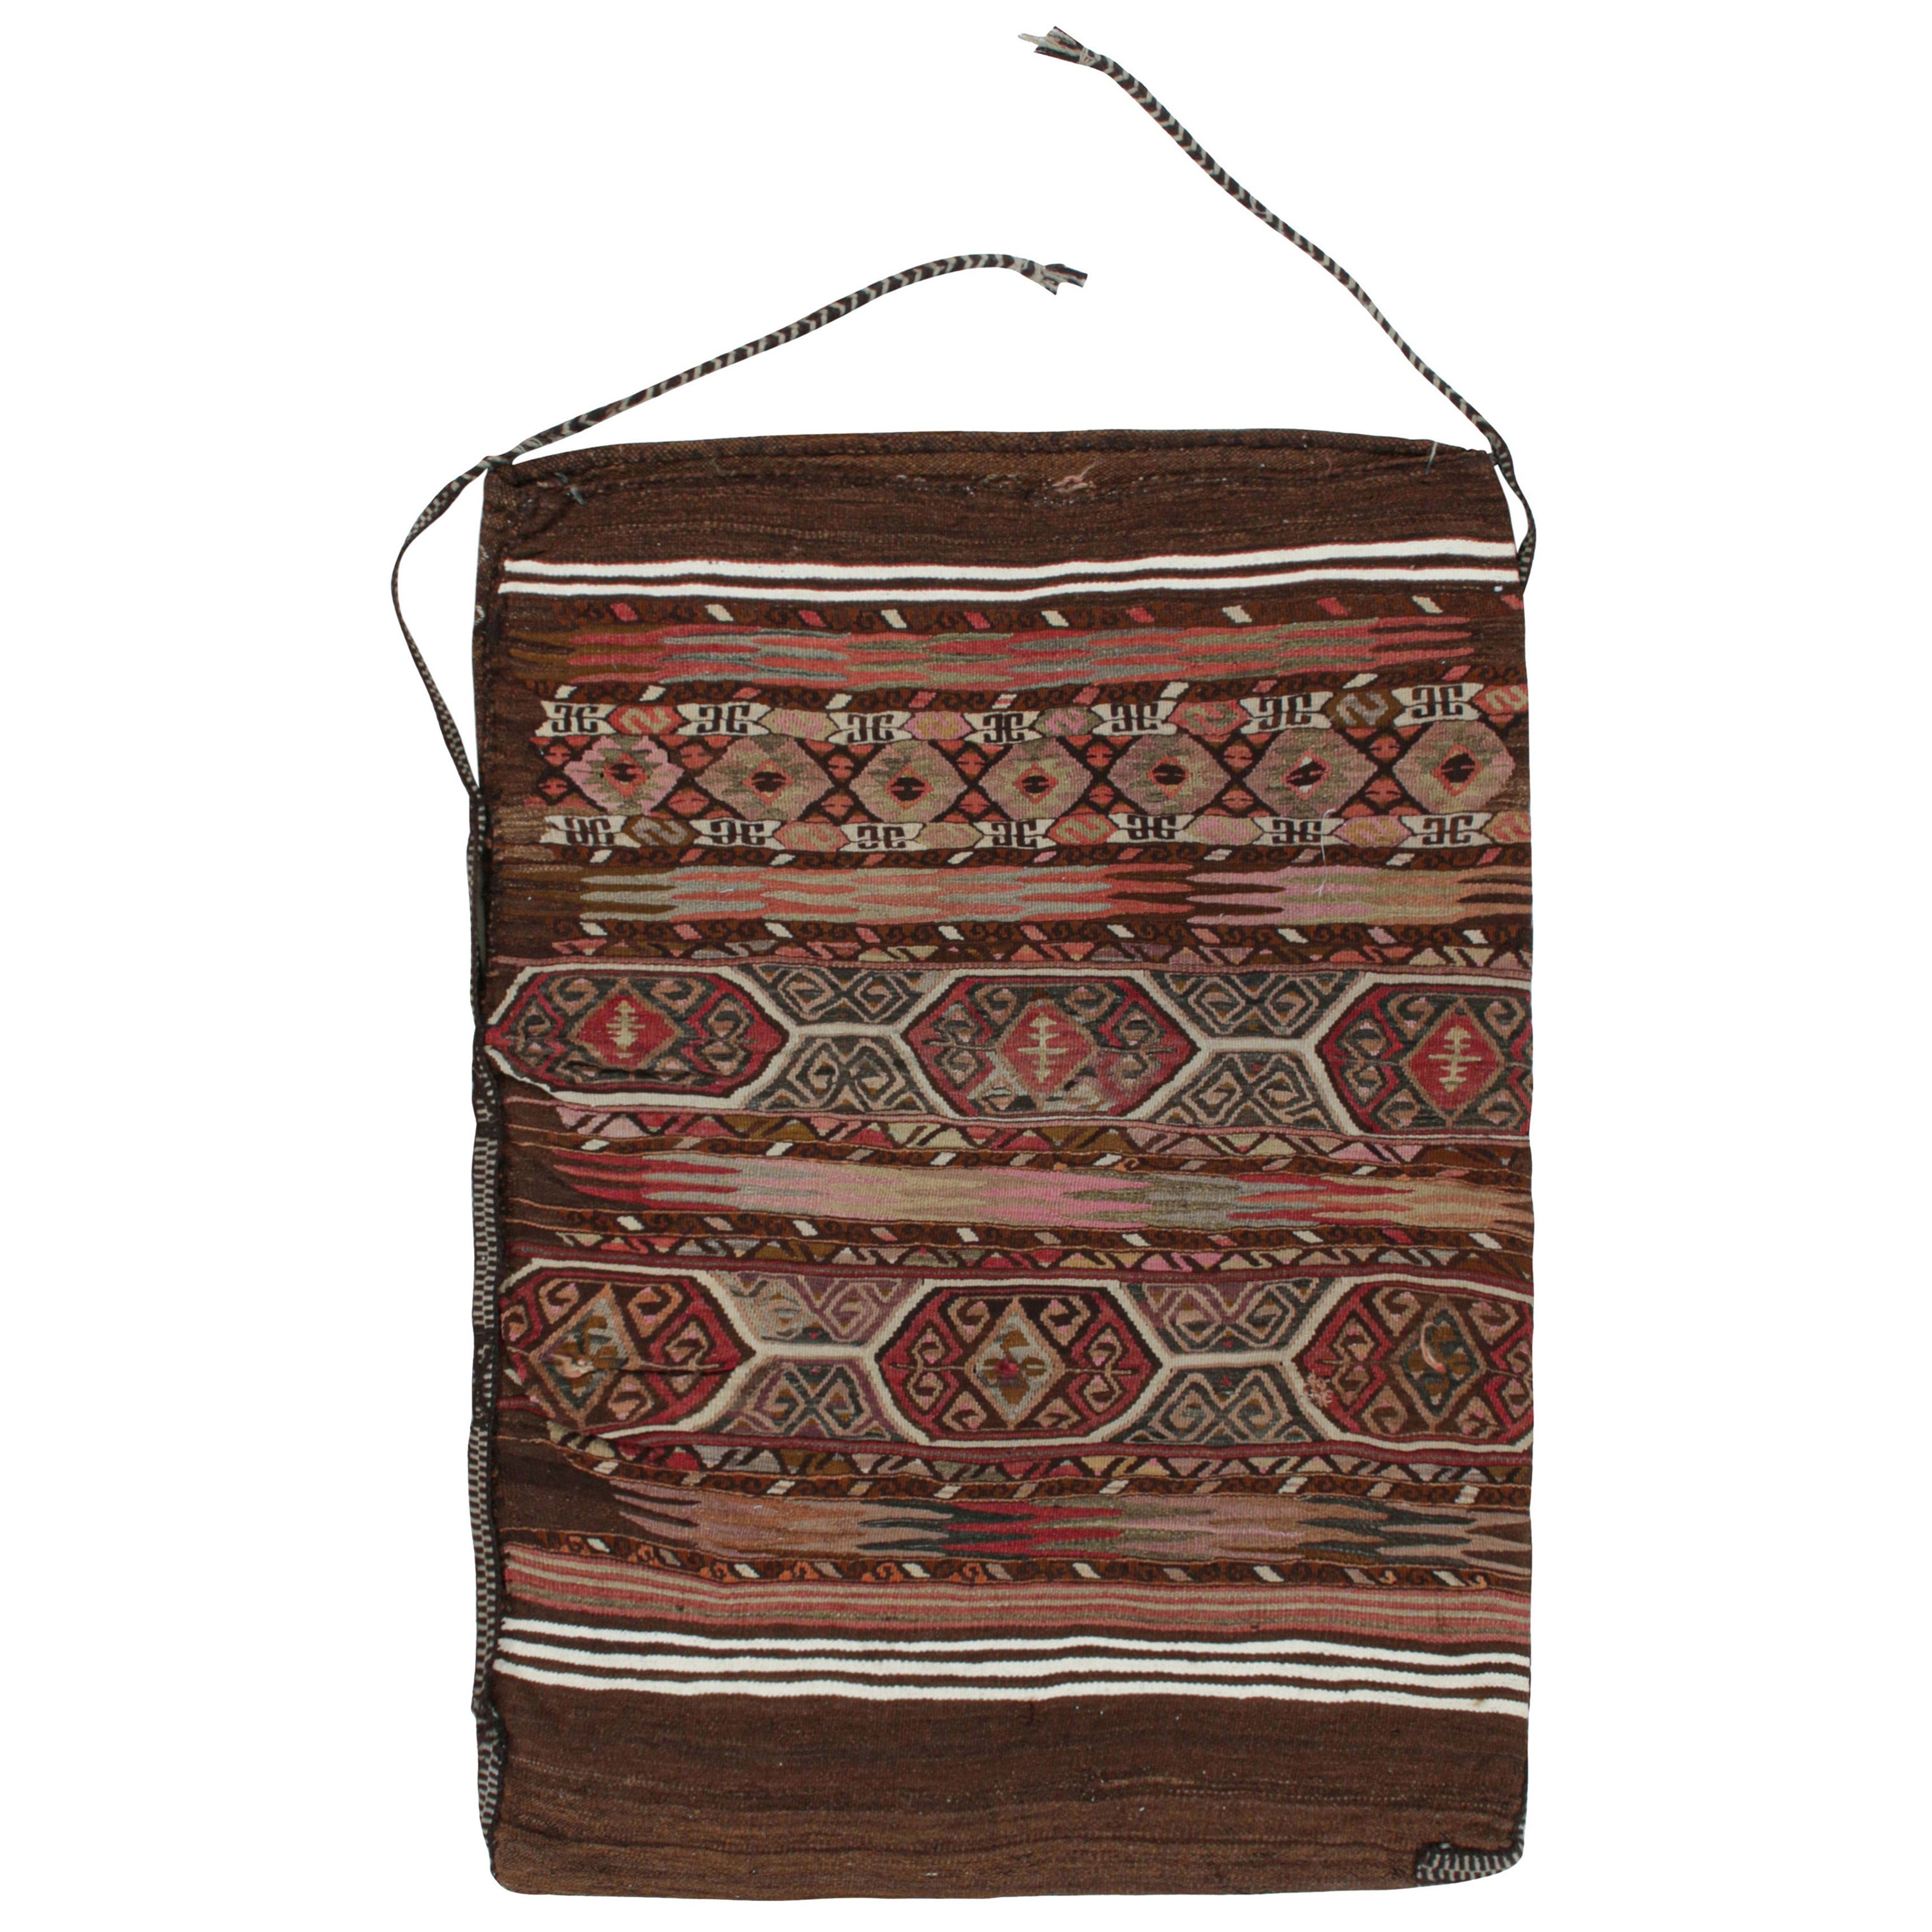 Antique Persian Tribal bag and Textile with Geometric Patterns, from Rug & Kilim For Sale